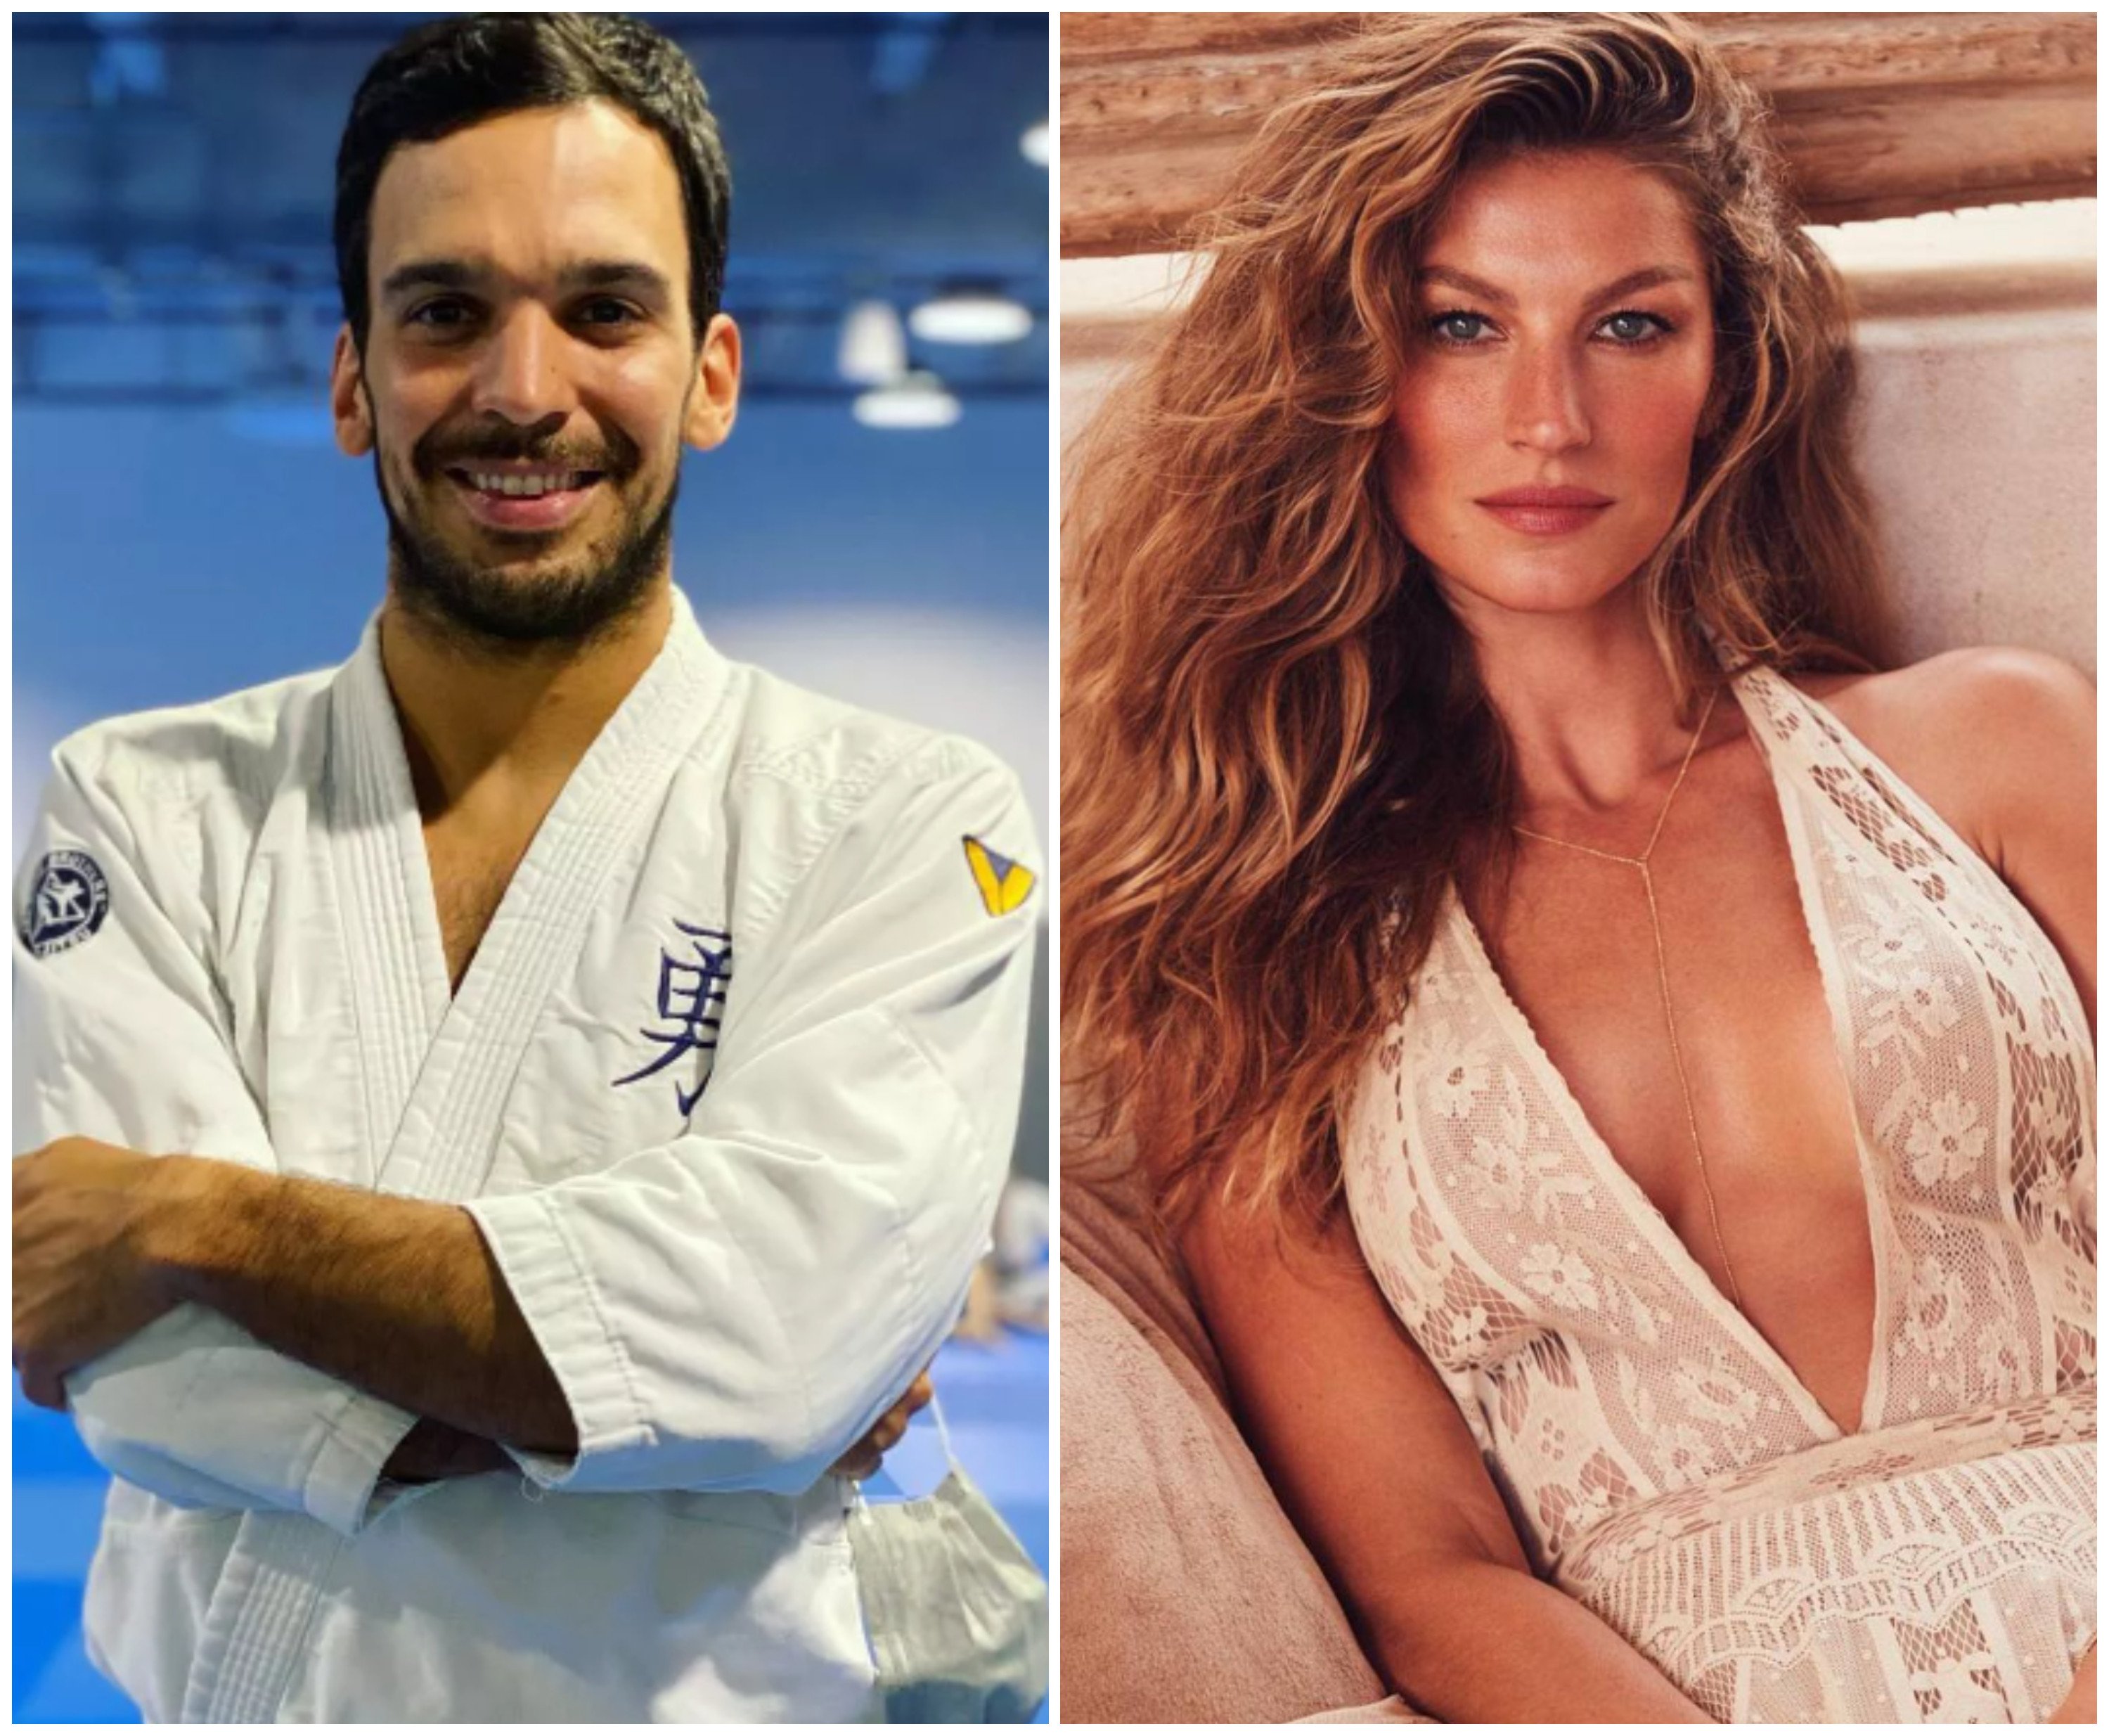 Gisele Bündchen has said she “admires and trusts” Joaquim Valente, and that he’s a good influence on her kids. Photos: @valentebrothers, @gisele/Instagram